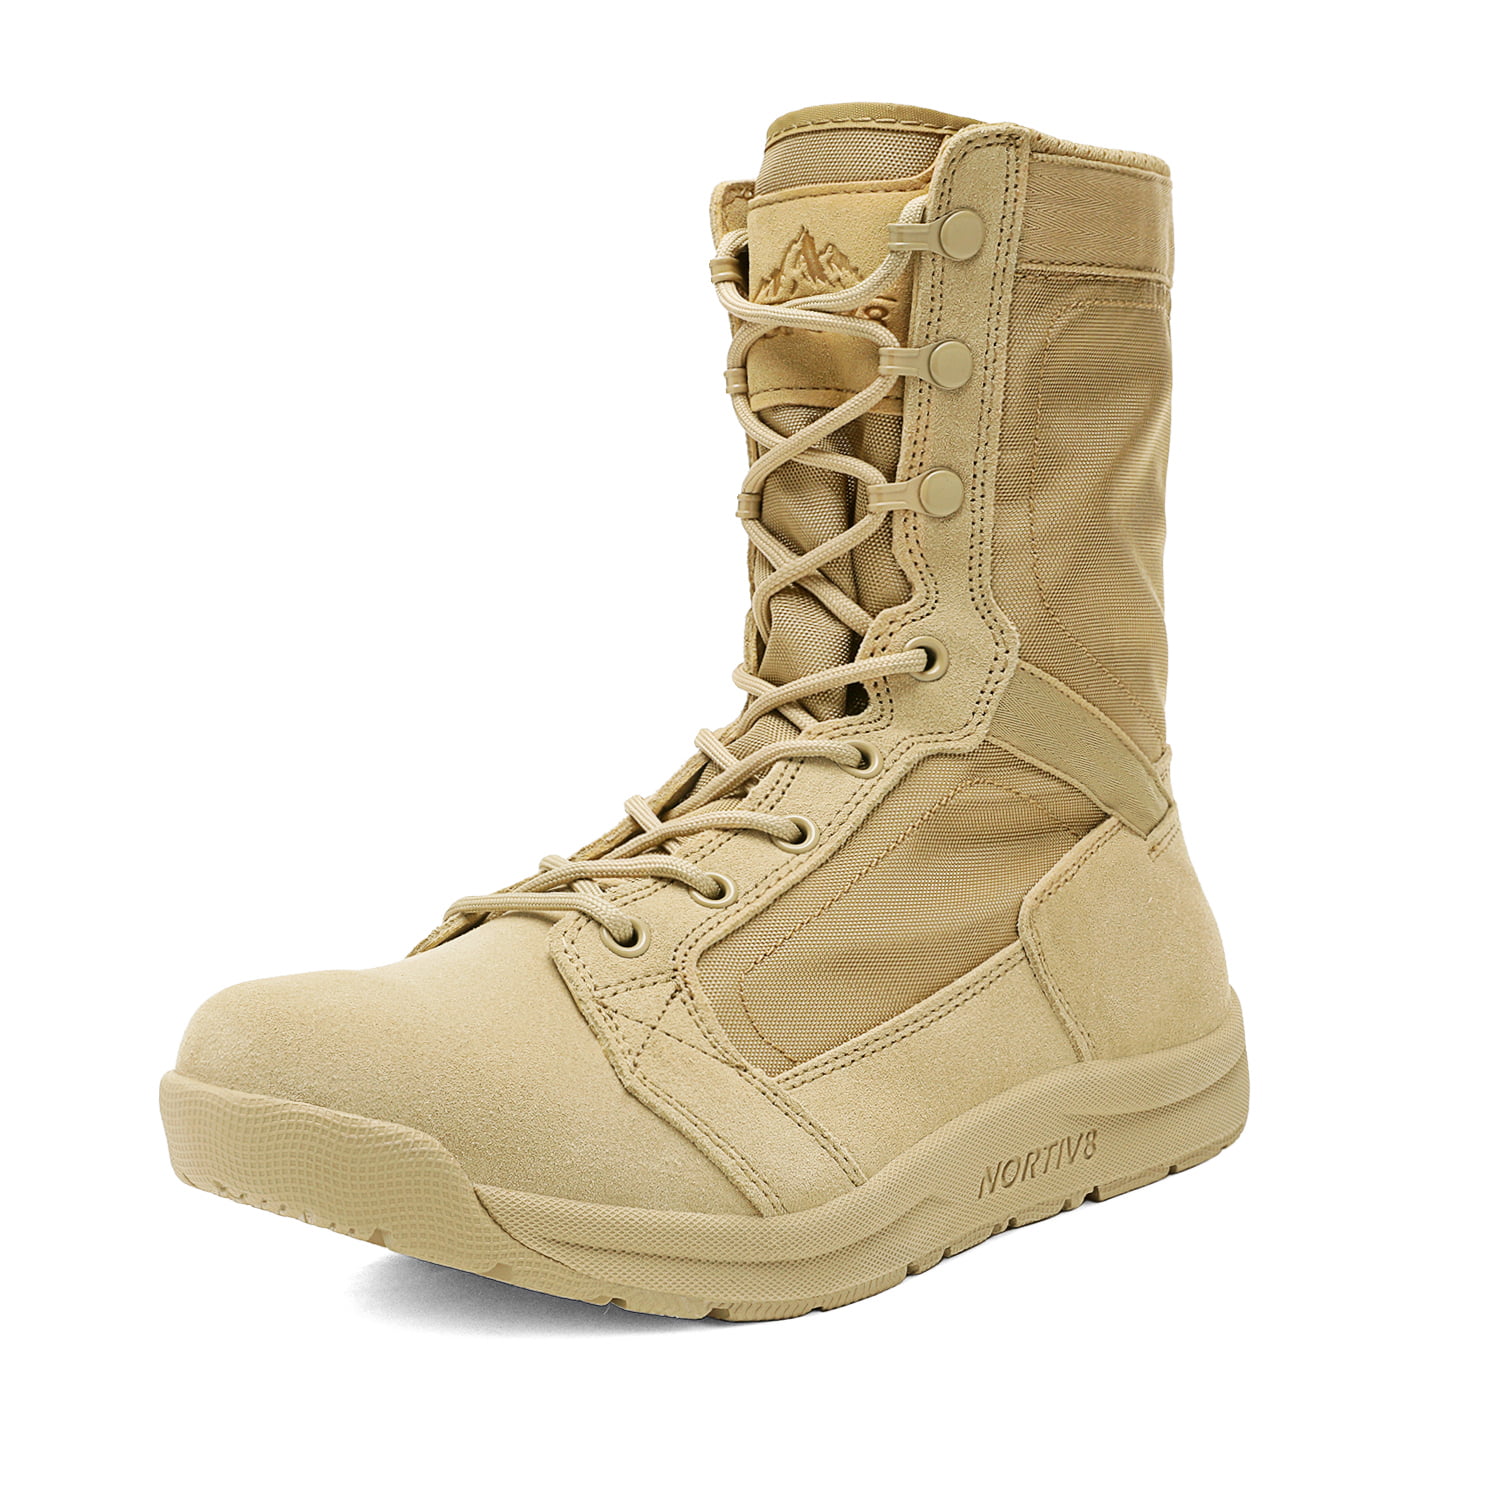 Super frist Mens Lightweight Combat Boots Outdoor Work Water Resistant Military Tactical Boots 